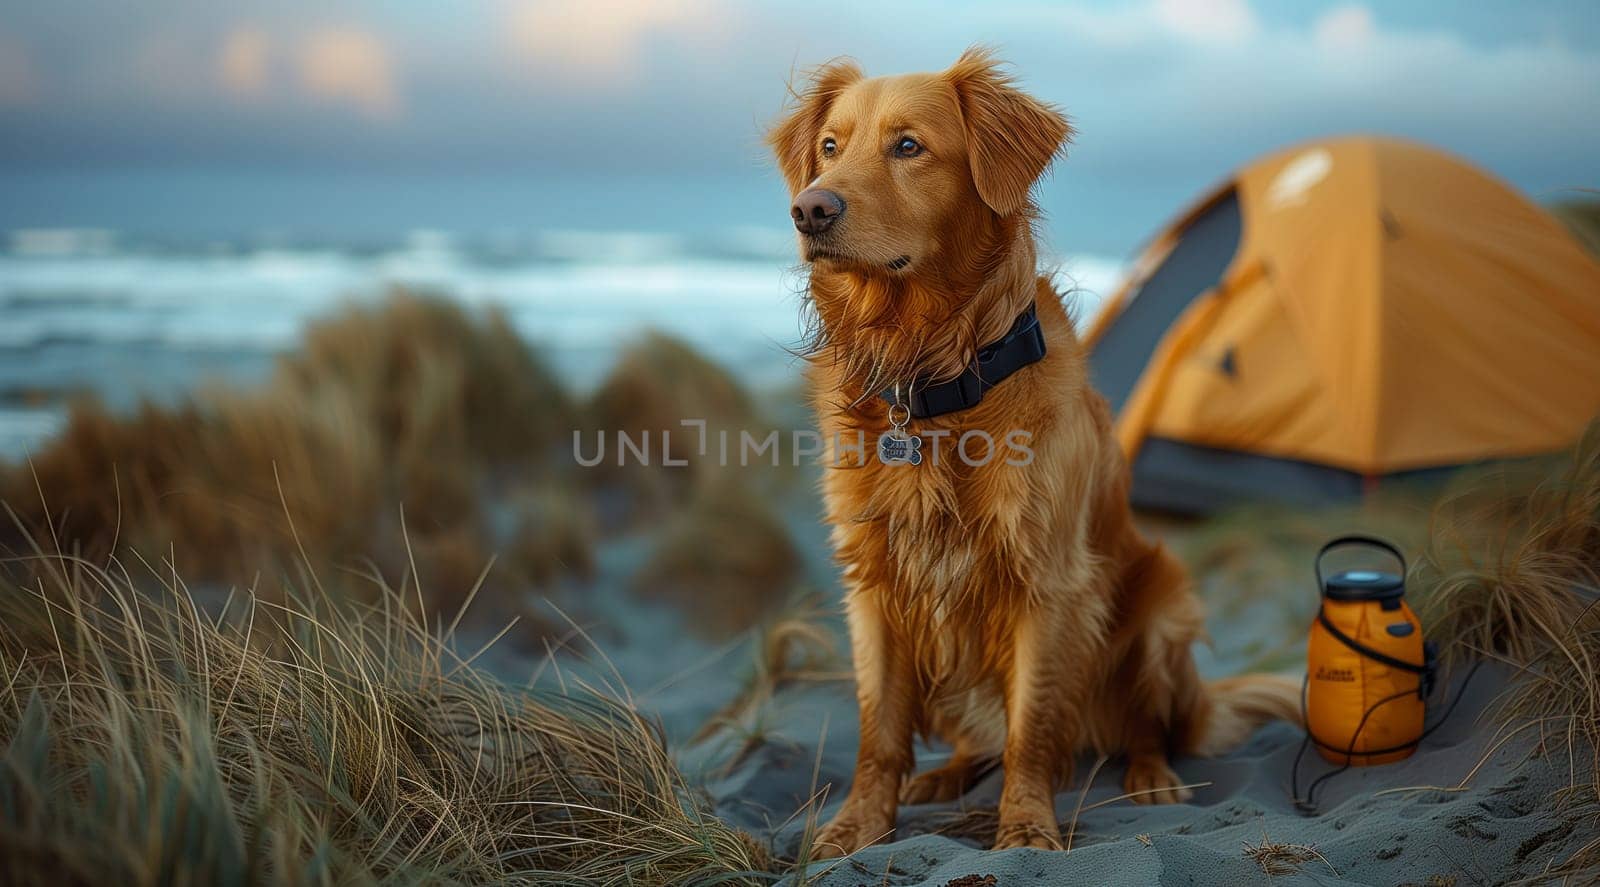 A carnivore dog with a fawn coat is resting on the beach near a tent by richwolf